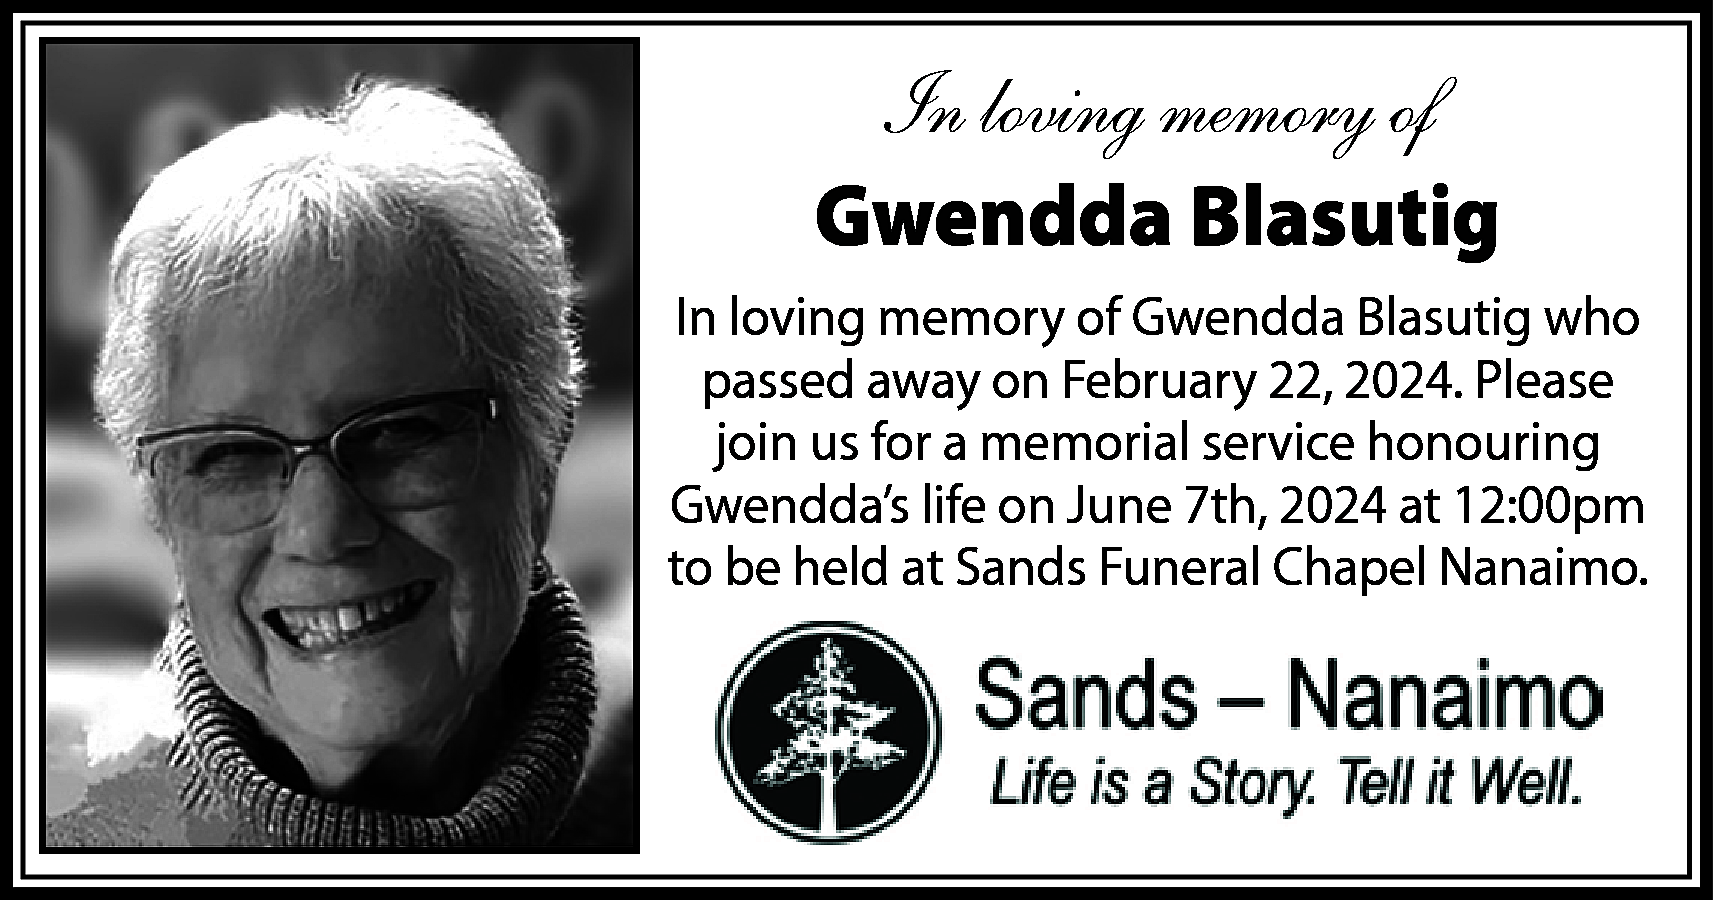 In loving memory of <br>Gwendda  In loving memory of  Gwendda Blasutig  In loving memory of Gwendda Blasutig who  passed away on February 22, 2024. Please  join us for a memorial service honouring  Gwendda’s life on June 7th, 2024 at 12:00pm  to be held at Sands Funeral Chapel Nanaimo.    